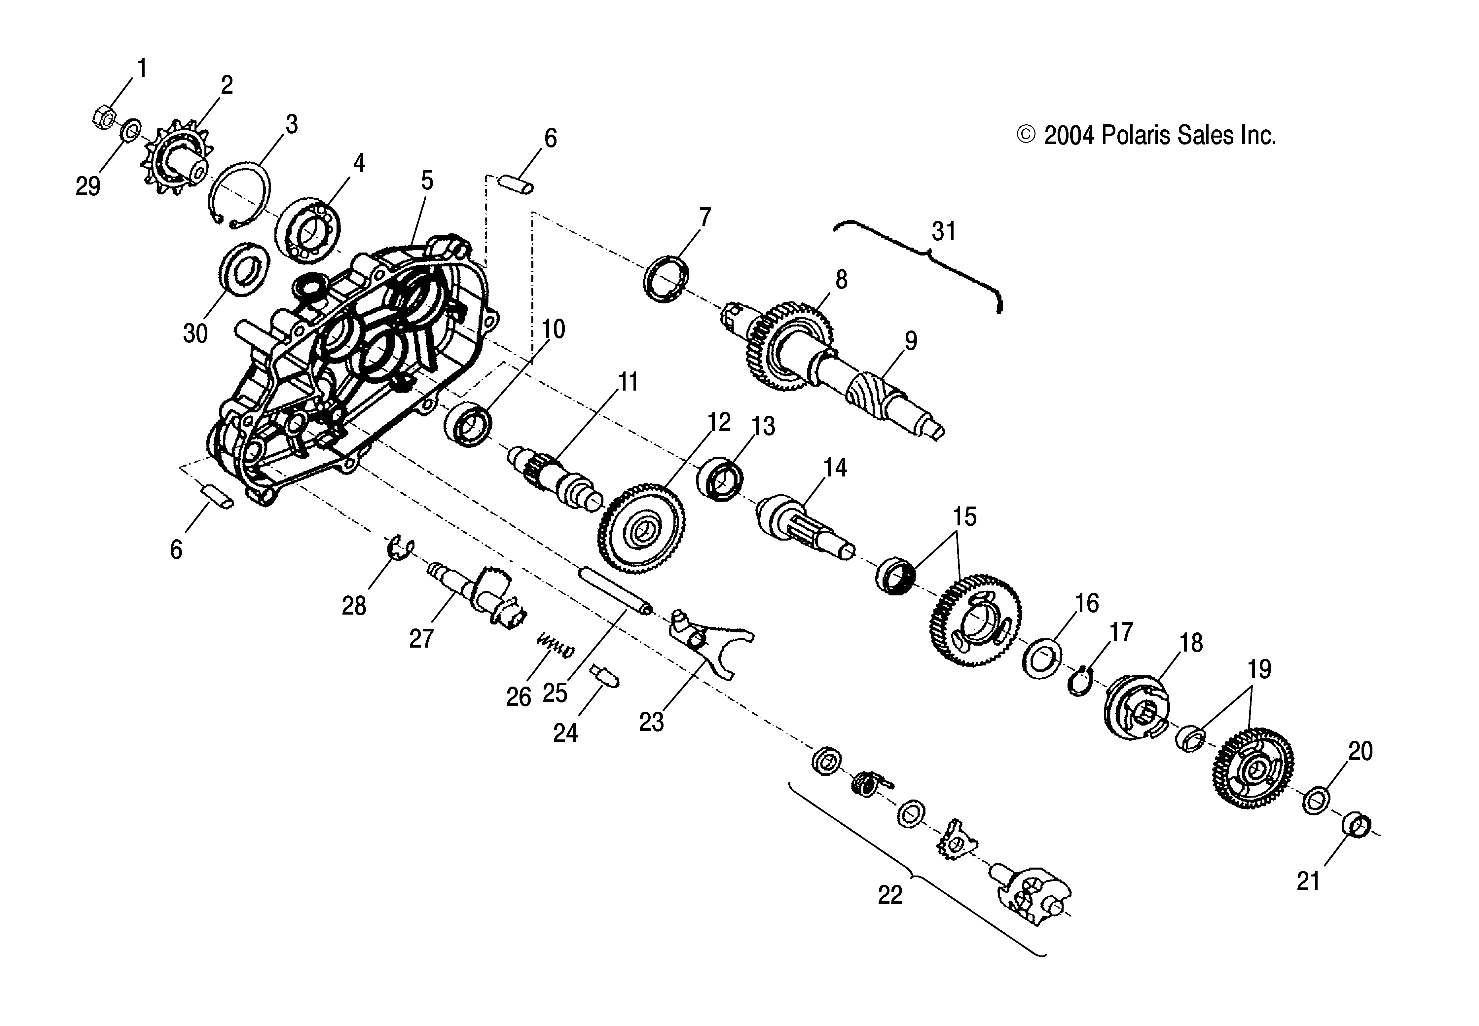 Part Number : 0453312 REVERSE GEAR ASSEMBLY